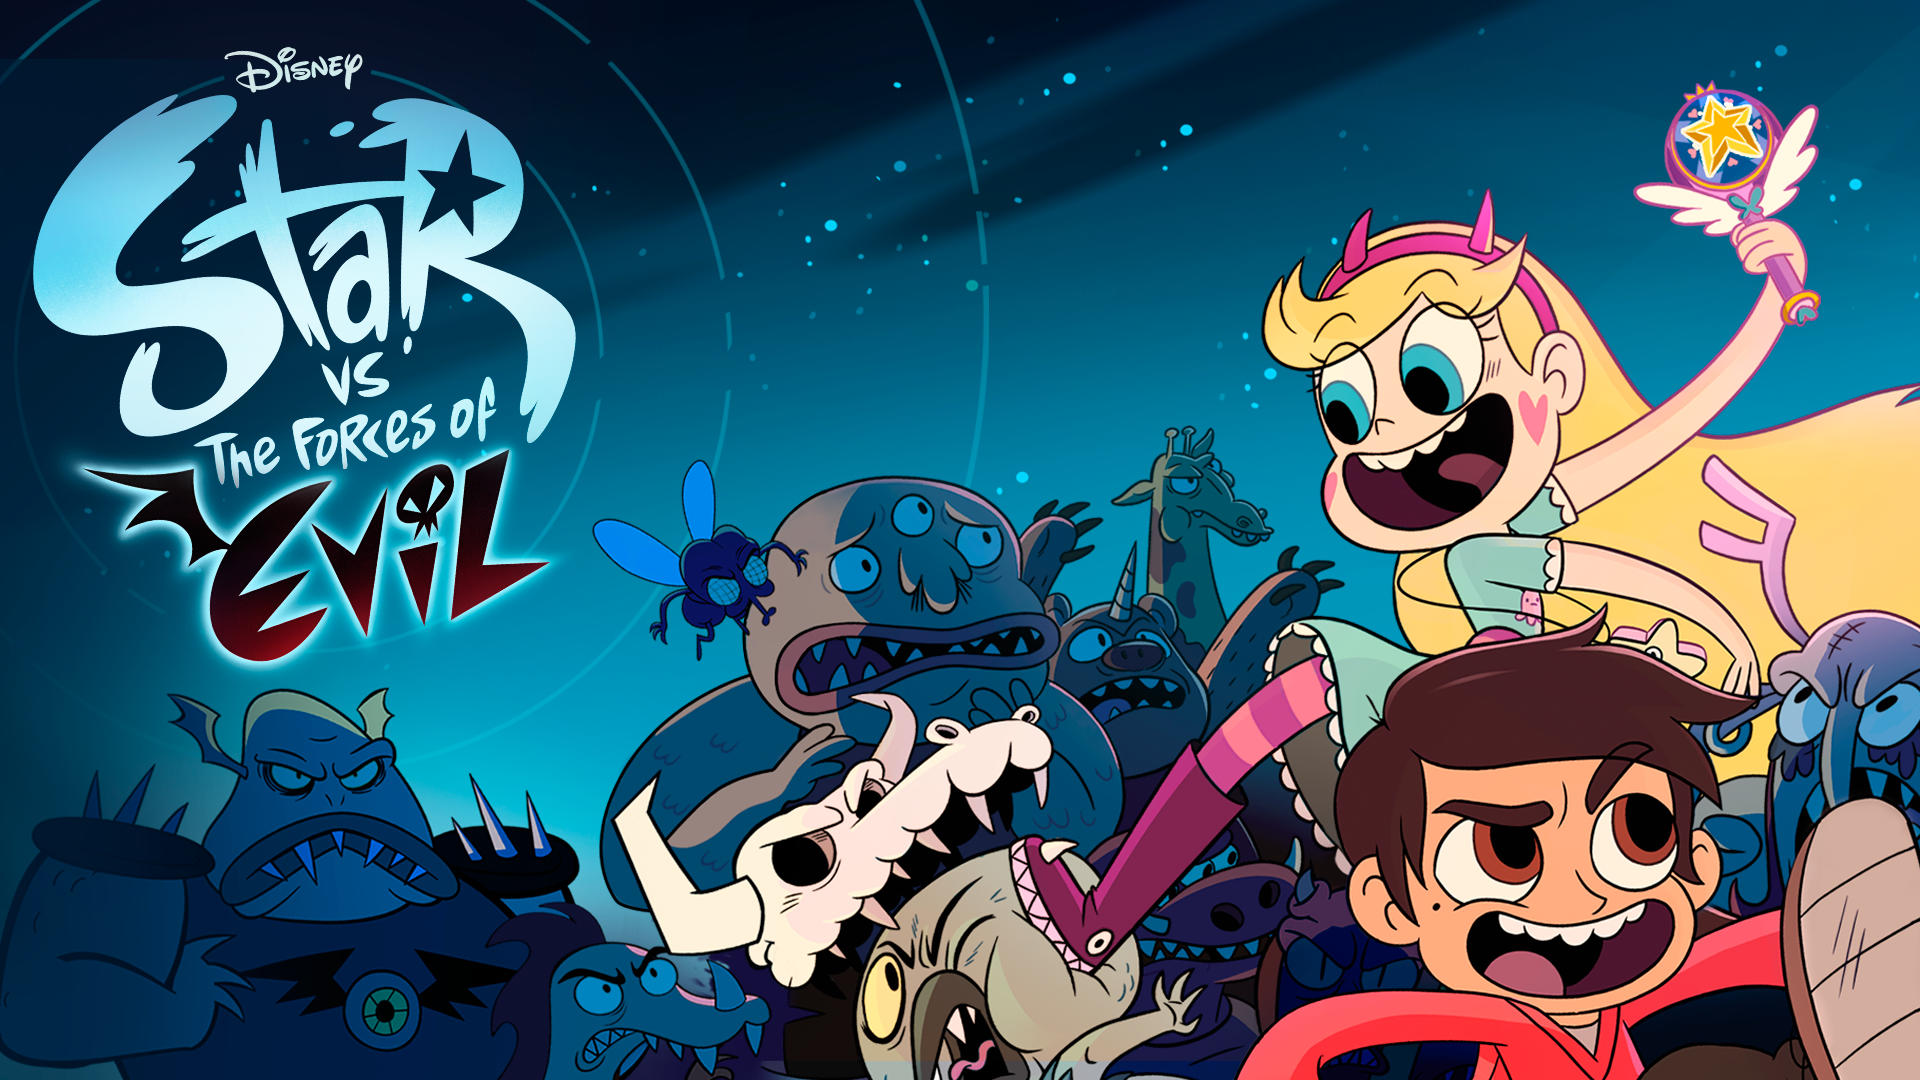 Star vs The Forces of Evil - What's On Disney Plus.